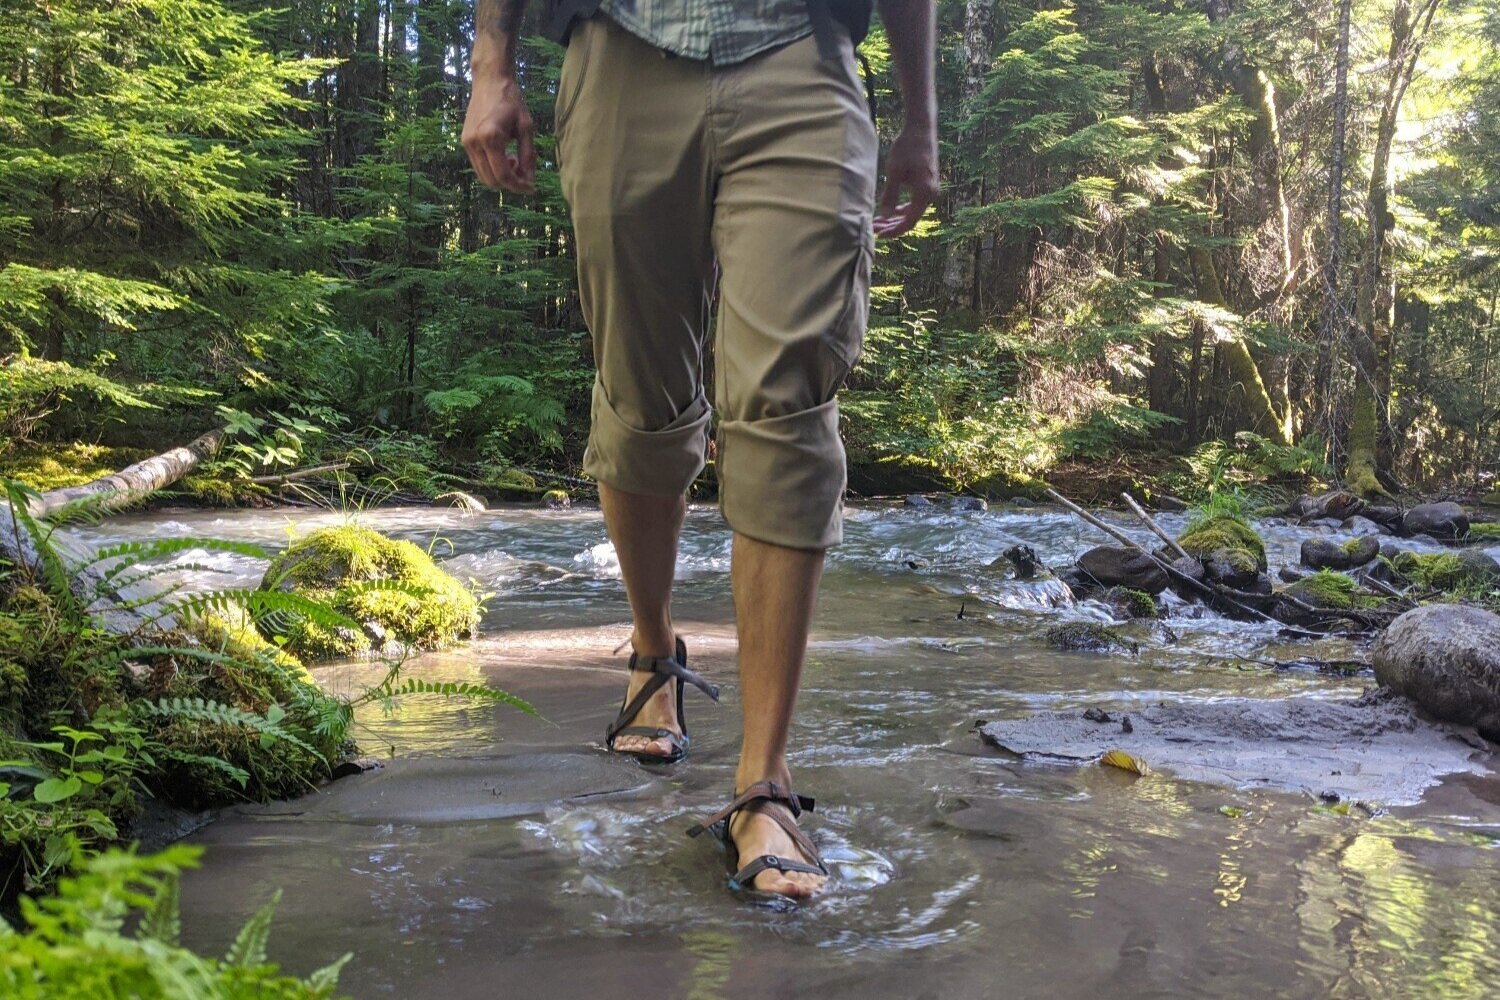 Using the Xero Shoes Z-Trail to cross a stream.